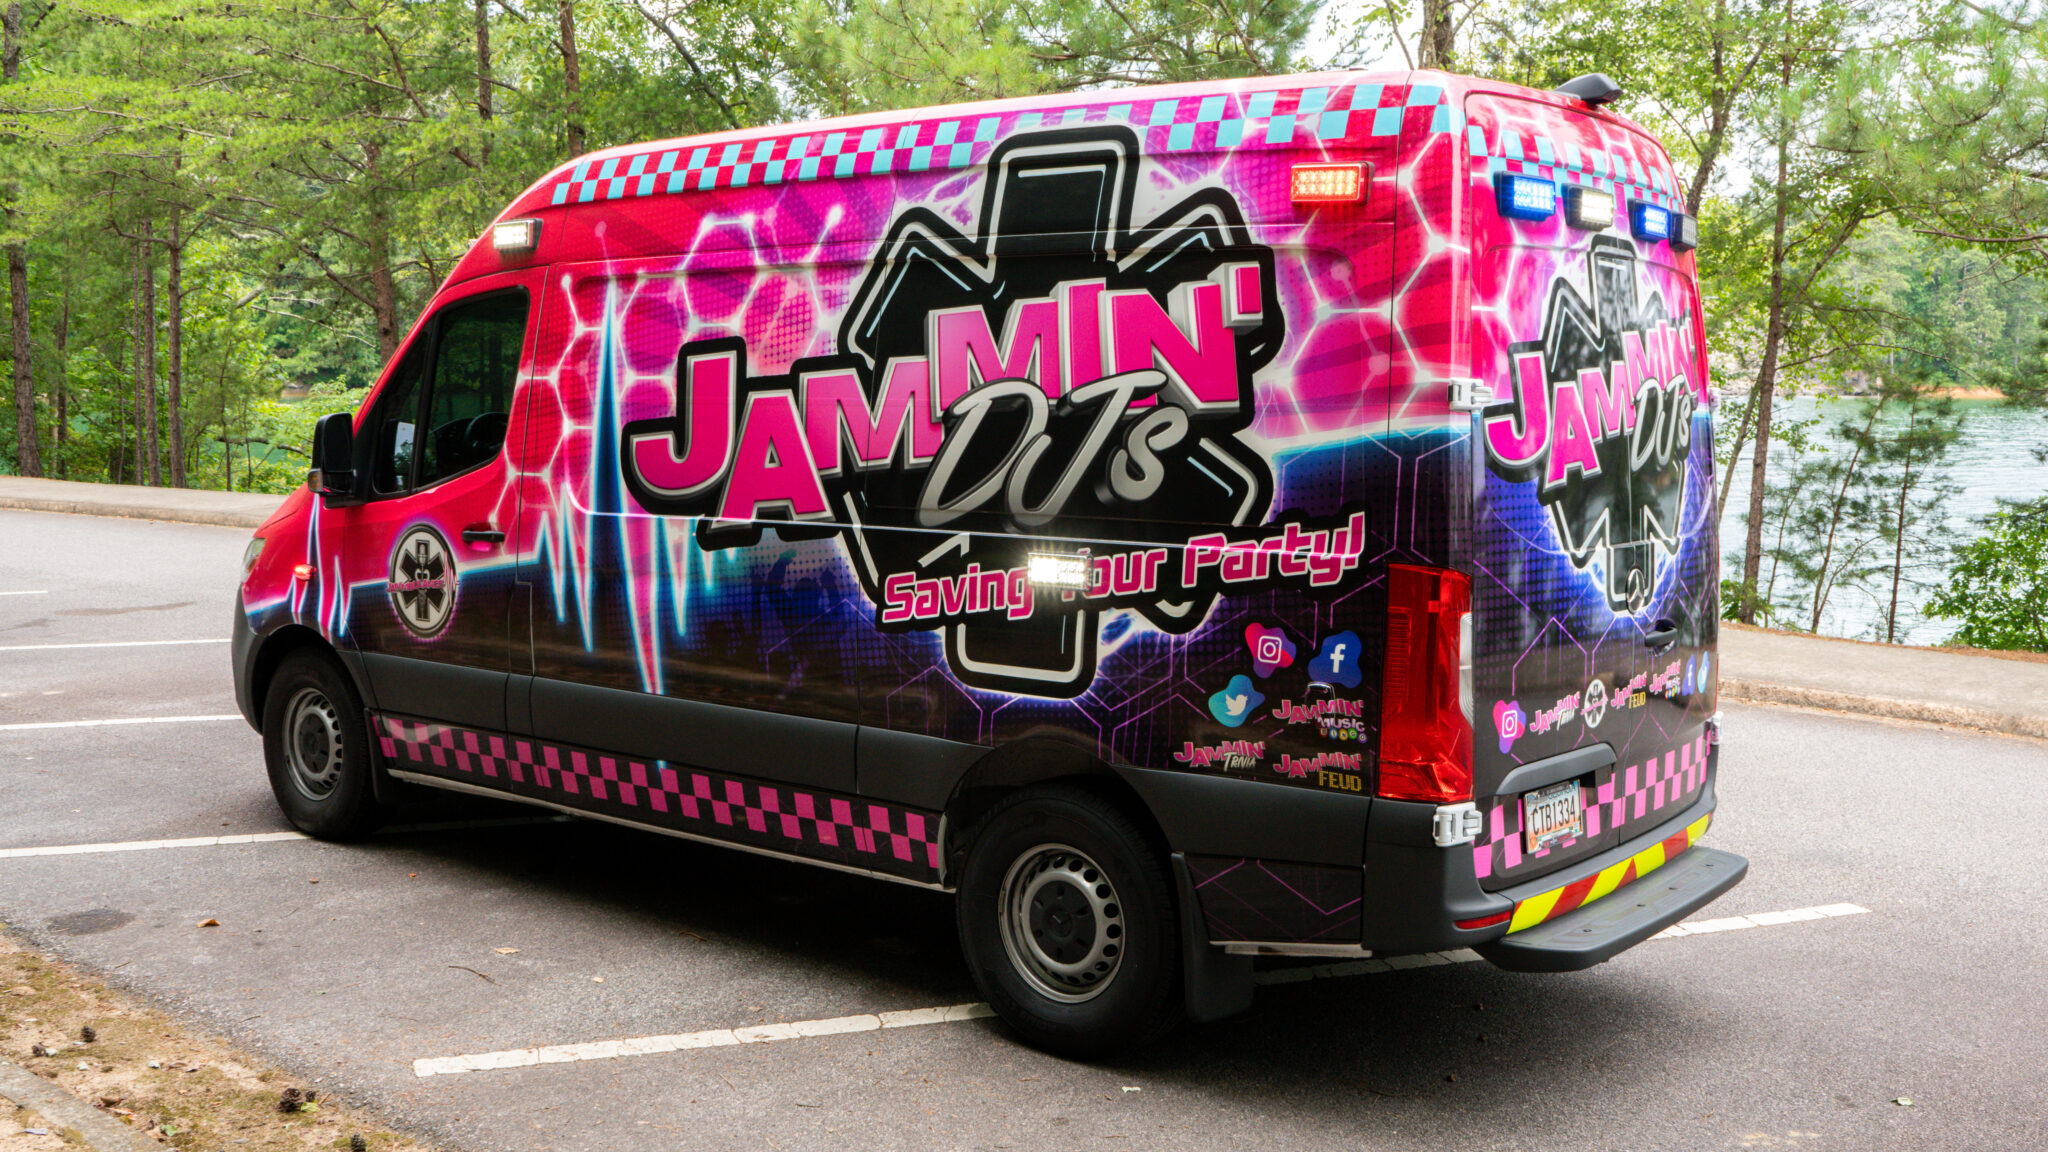 A pink and black van, offering photo booth rental services in Georgia, parked in a parking lot.